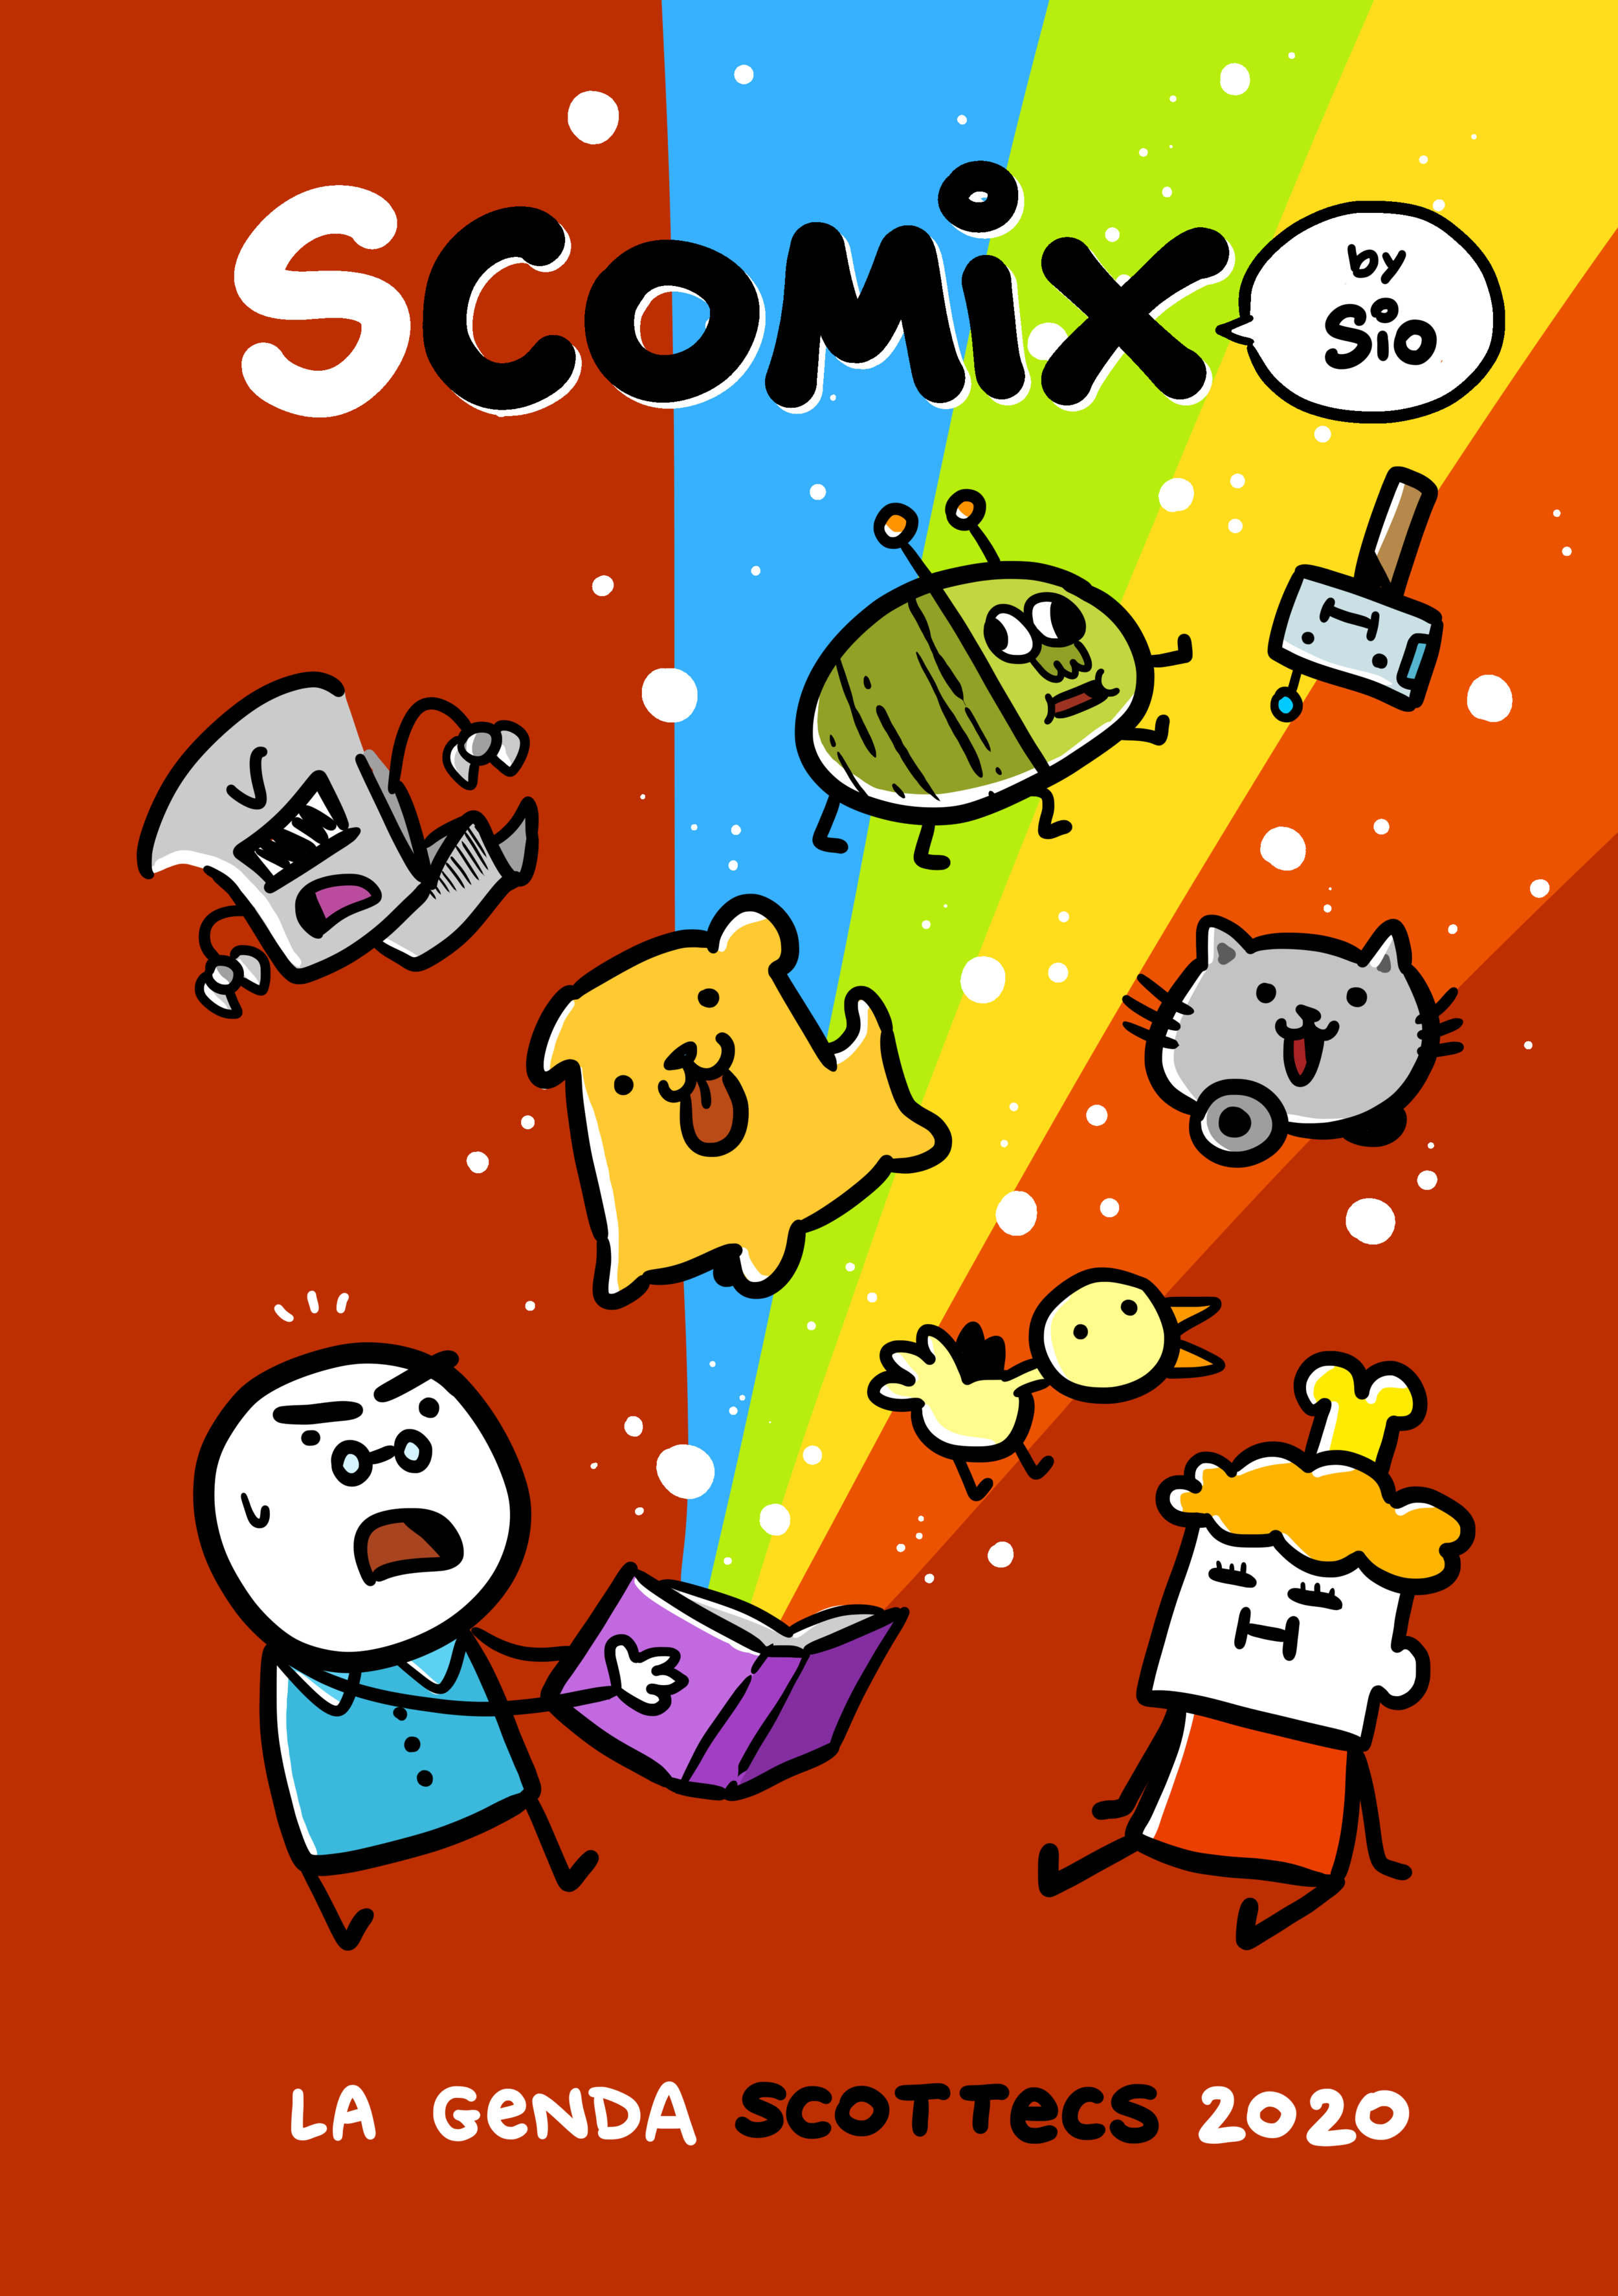 Cover Scomix 2020 rossa.png